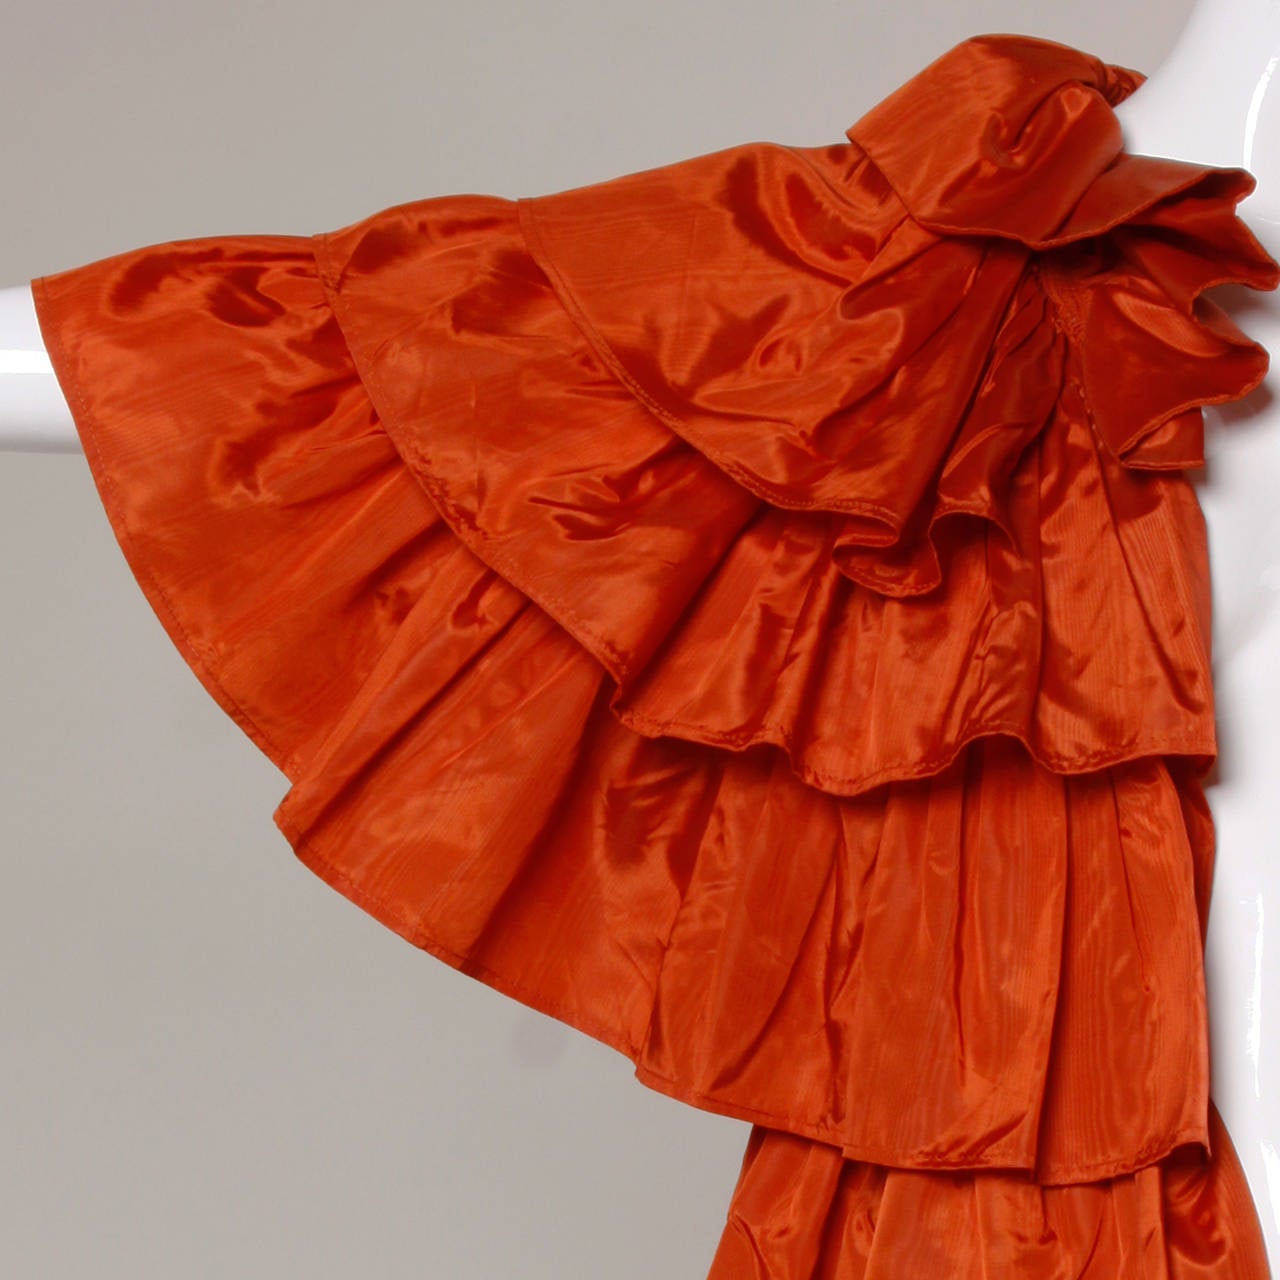 Reduced from $795! Unique rust taffeta tiered maxi coat with a pop up collar and bat wing sleeves. 

Details:

Fully Lined
No Closure
Marked Size: Not Marked
Estimated Size: Free
Color: Rust
Fabric: Taffeta
Label: Not